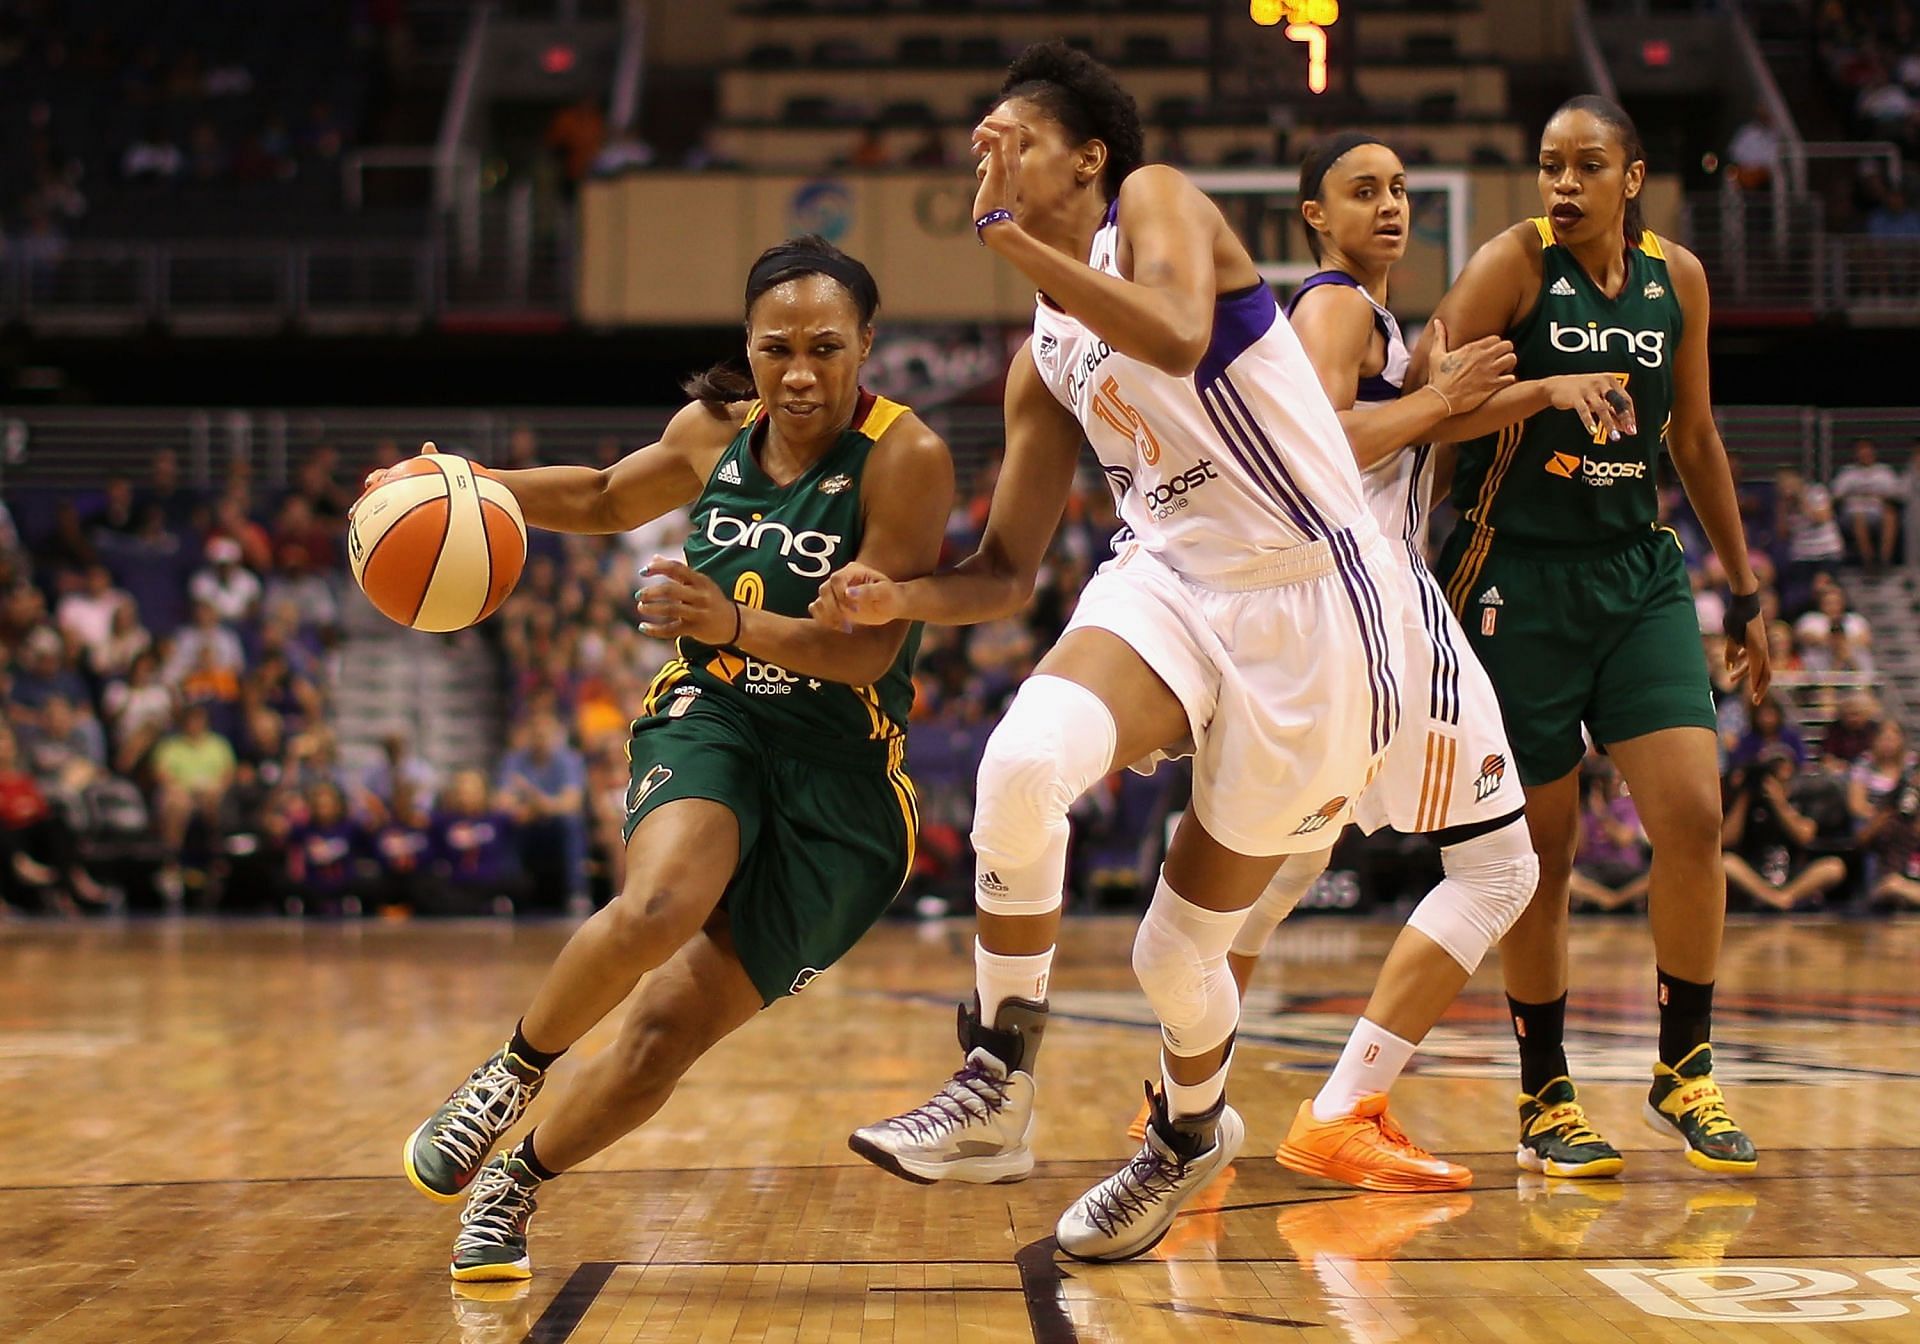 Temeka Johnson, shown here in the WNBA, was the top passer in LSU basketball history.